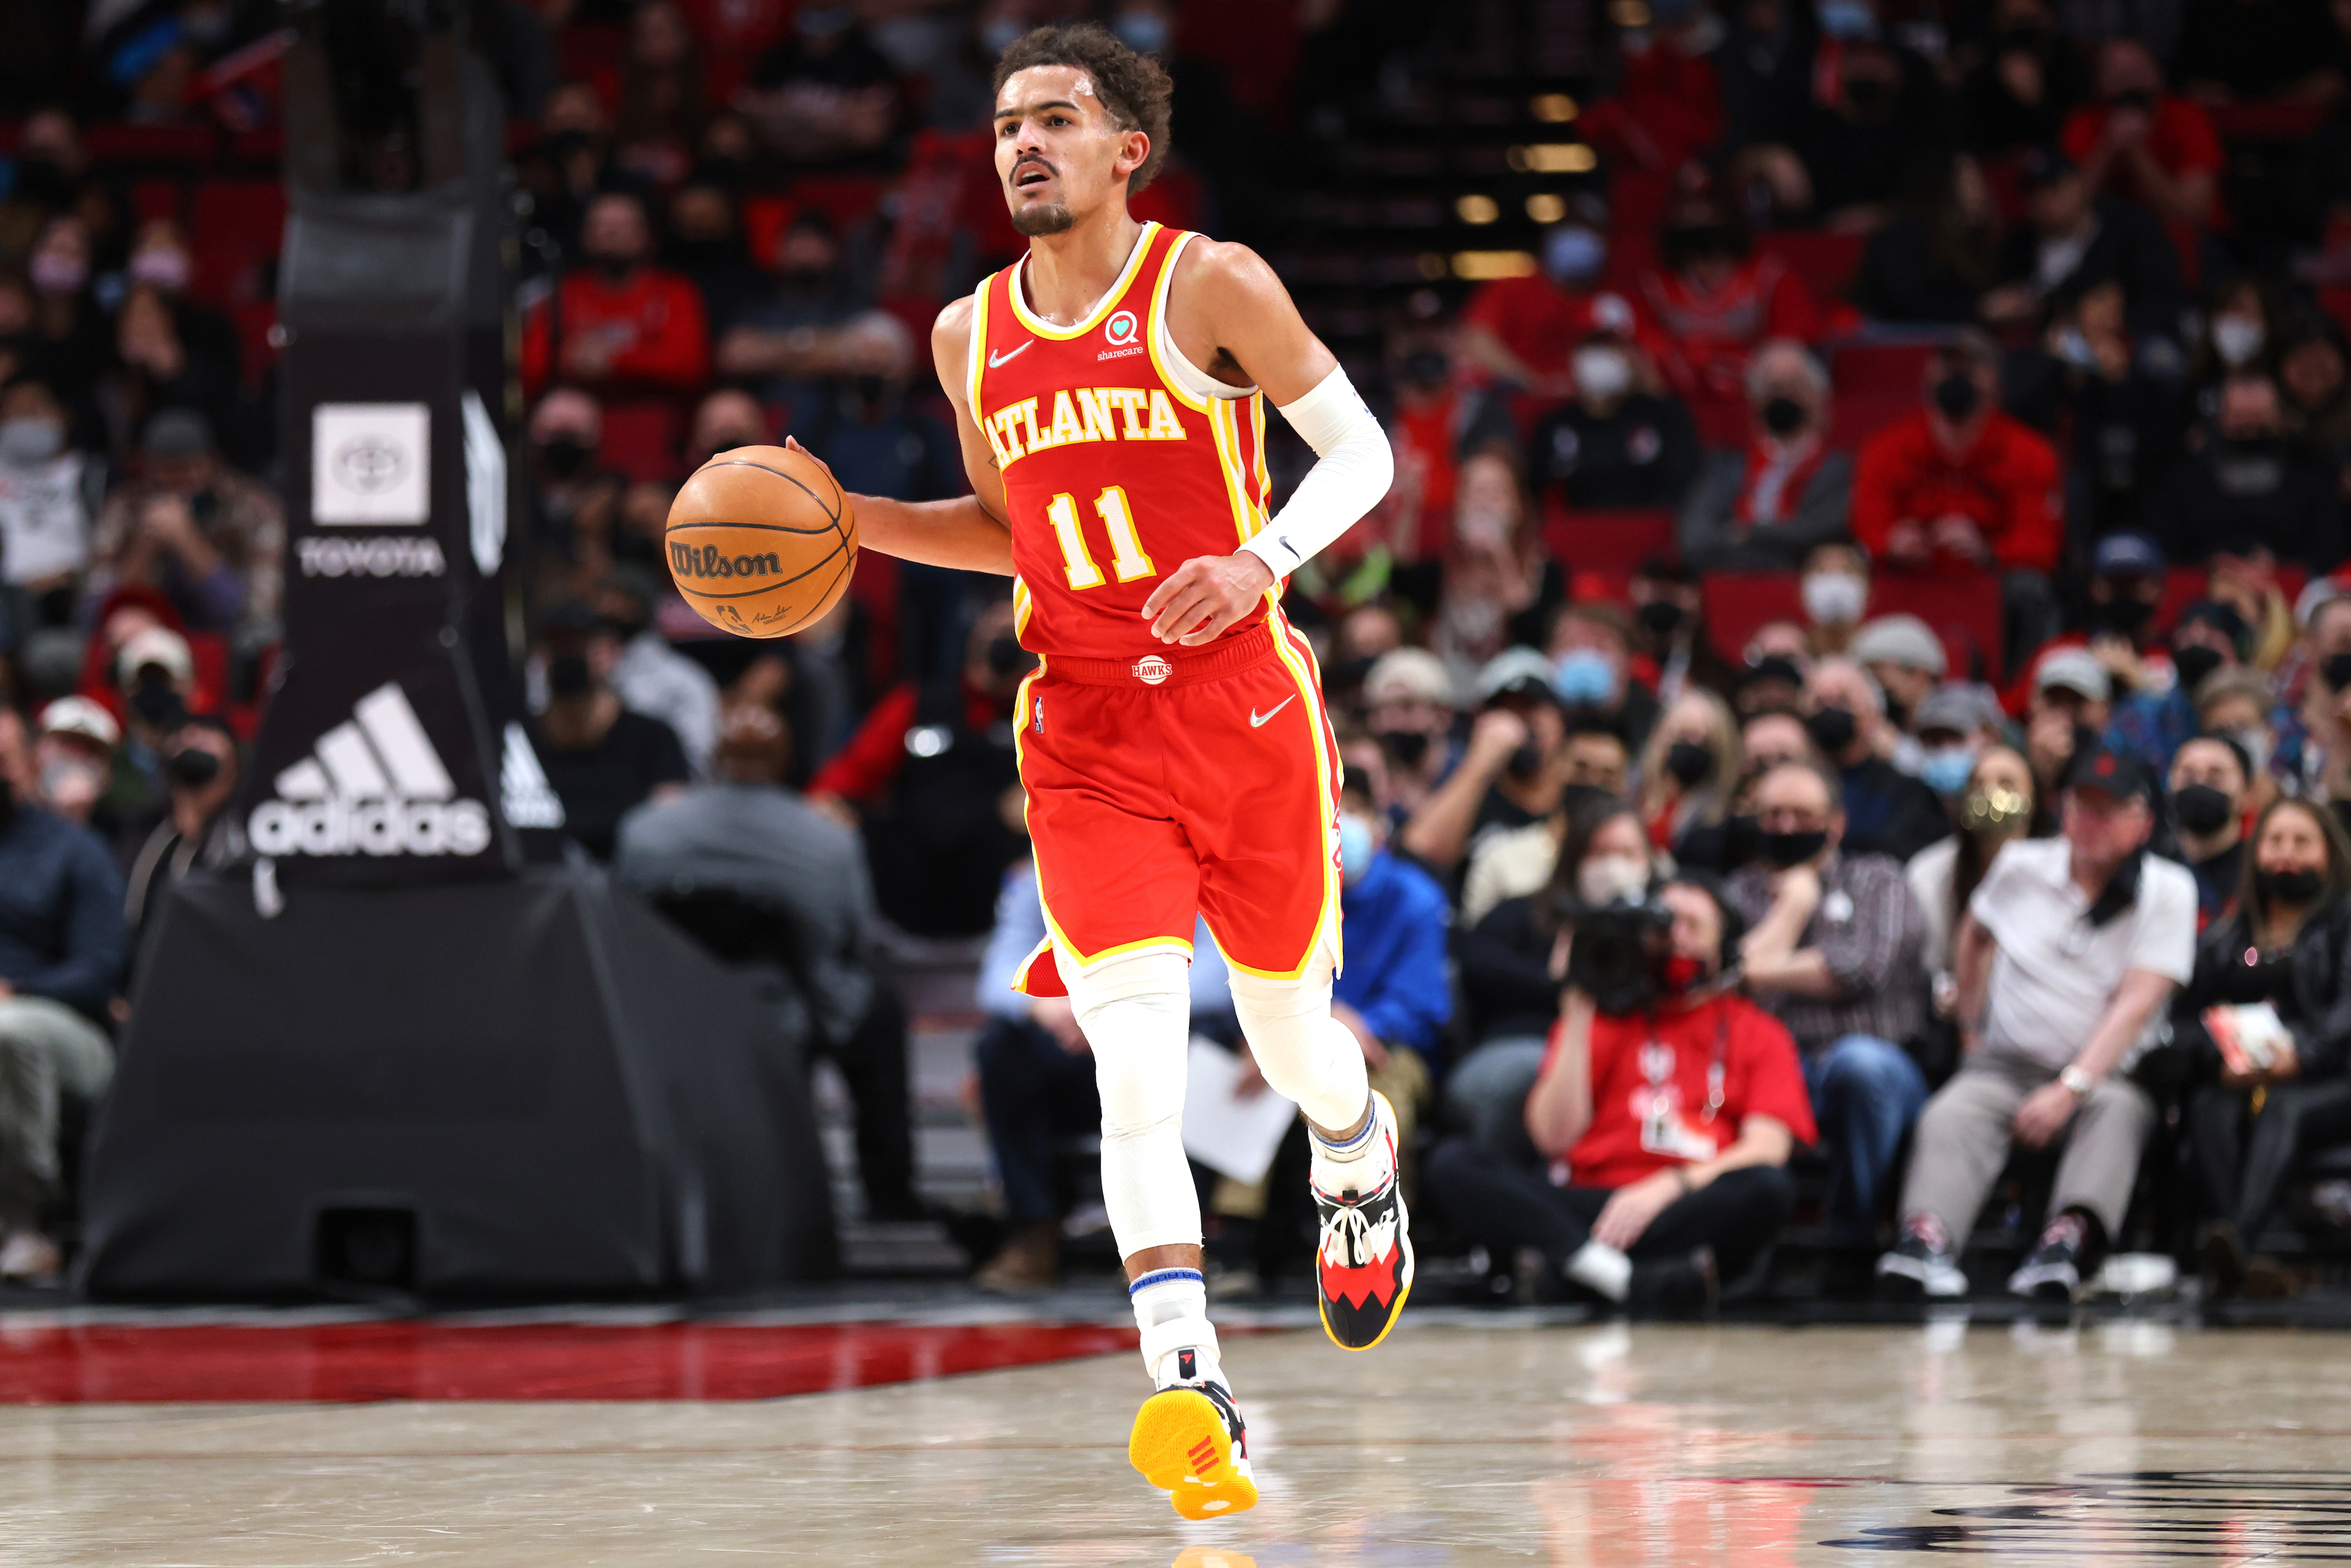 Atlanta Hawks point guard Trae Young dribbles the ball during a game against the Portland Trail Blazers